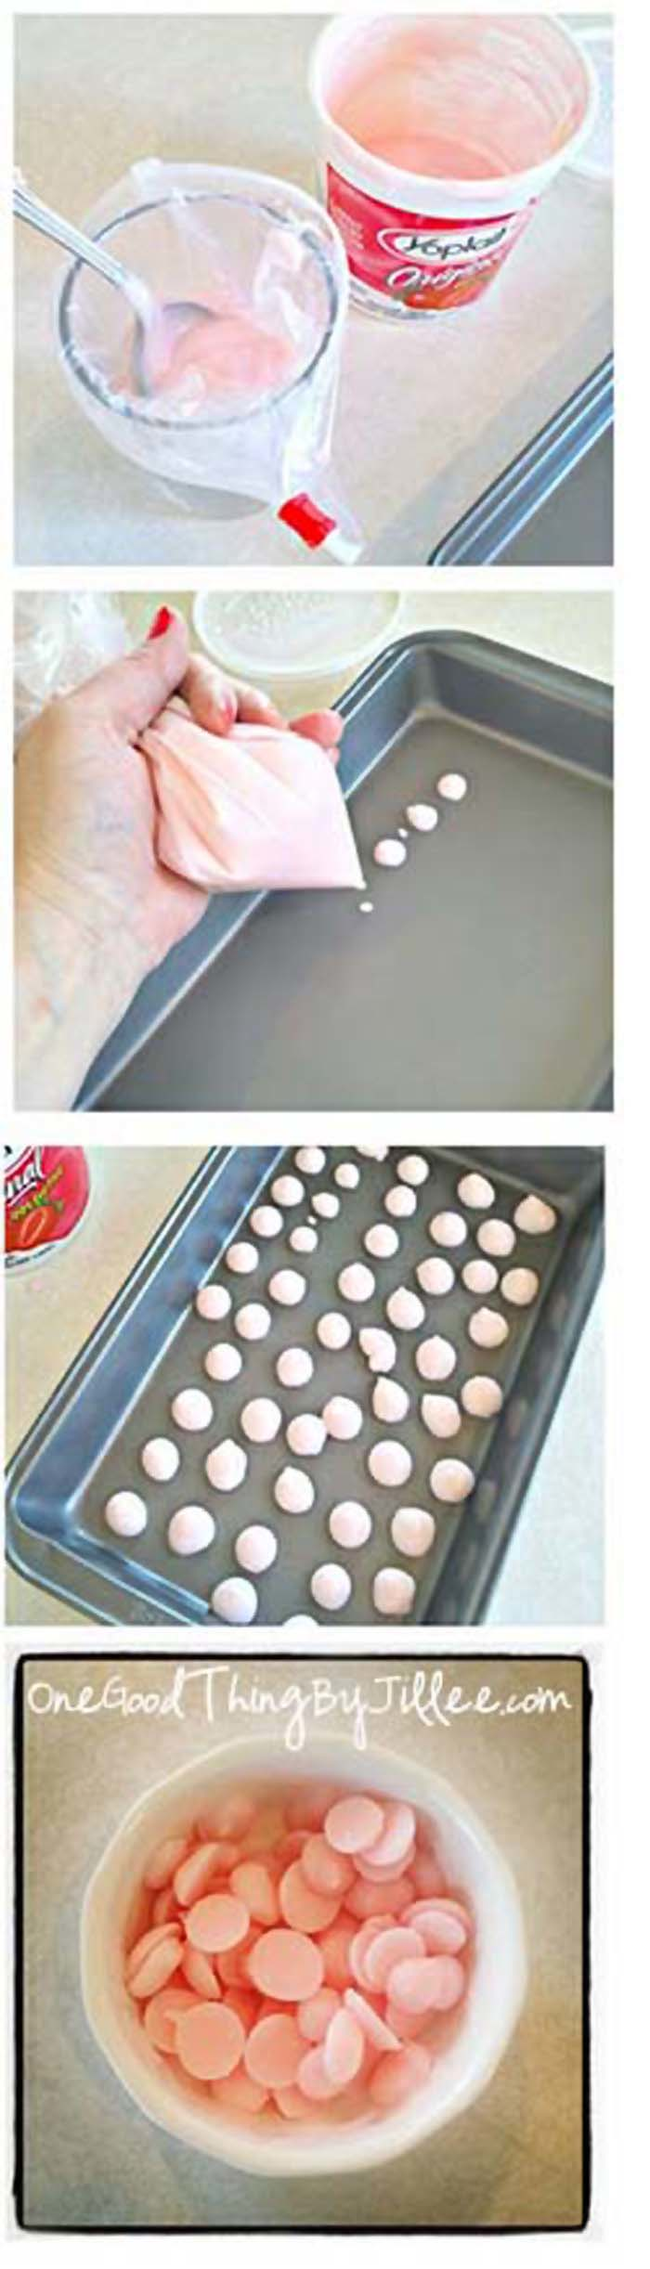 4.) Frozen yogurt dots--and no picking shredded paper out of your mouth! (By <a href="https://www.onegoodthingbyjillee.com/2012/03/frozen-yogurt-dots.html">One Good Thing by Jillee</a>)